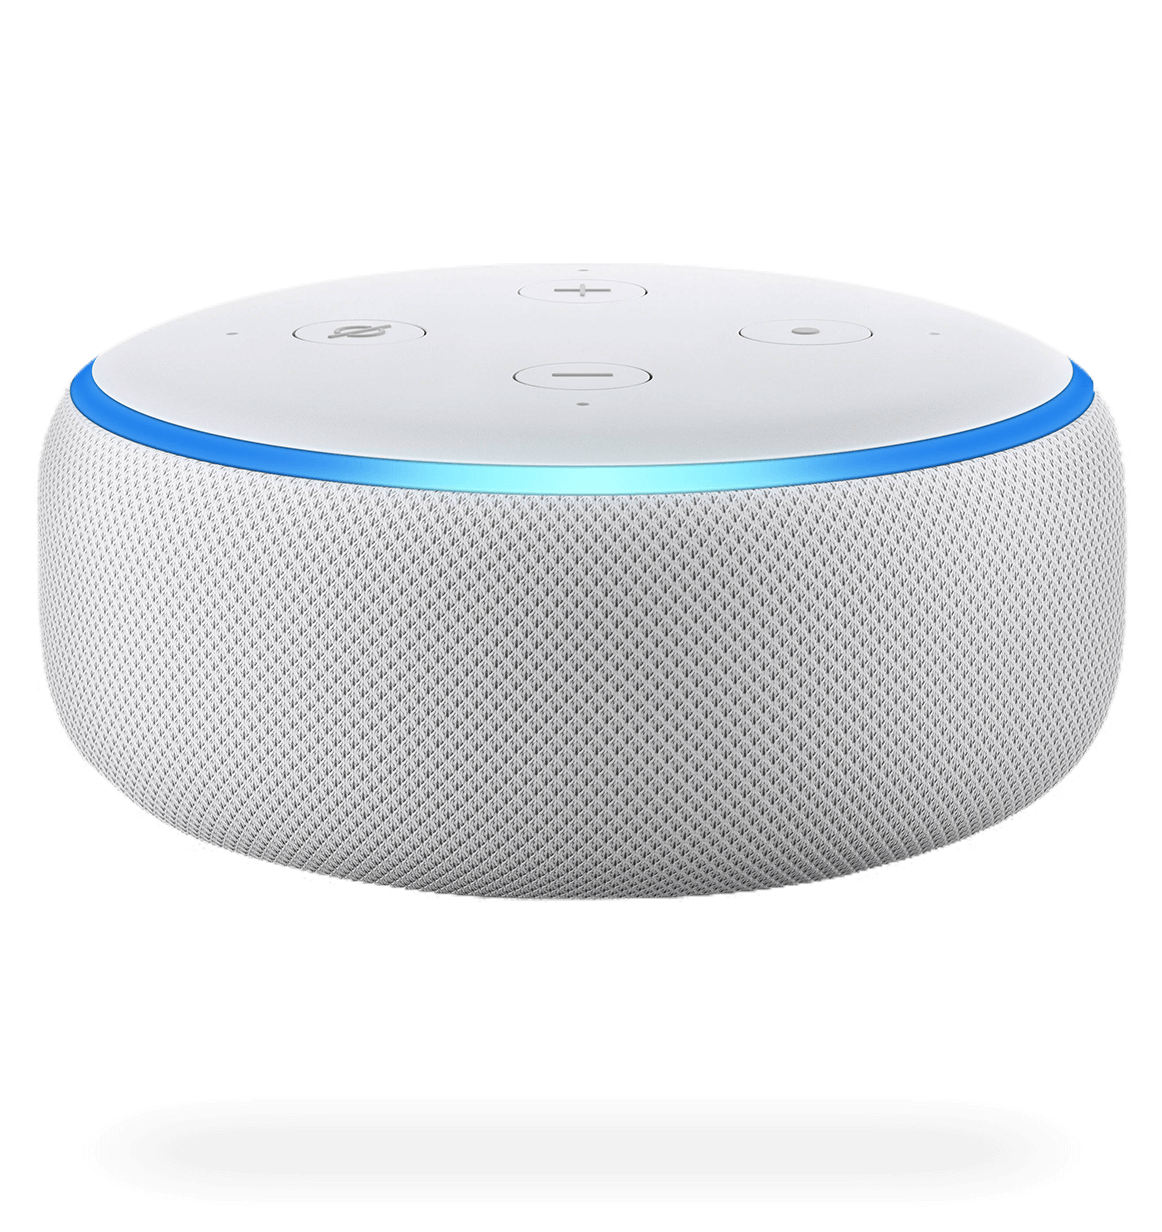 Thinking about selling your Echo Dot—or any IoT device? Read this